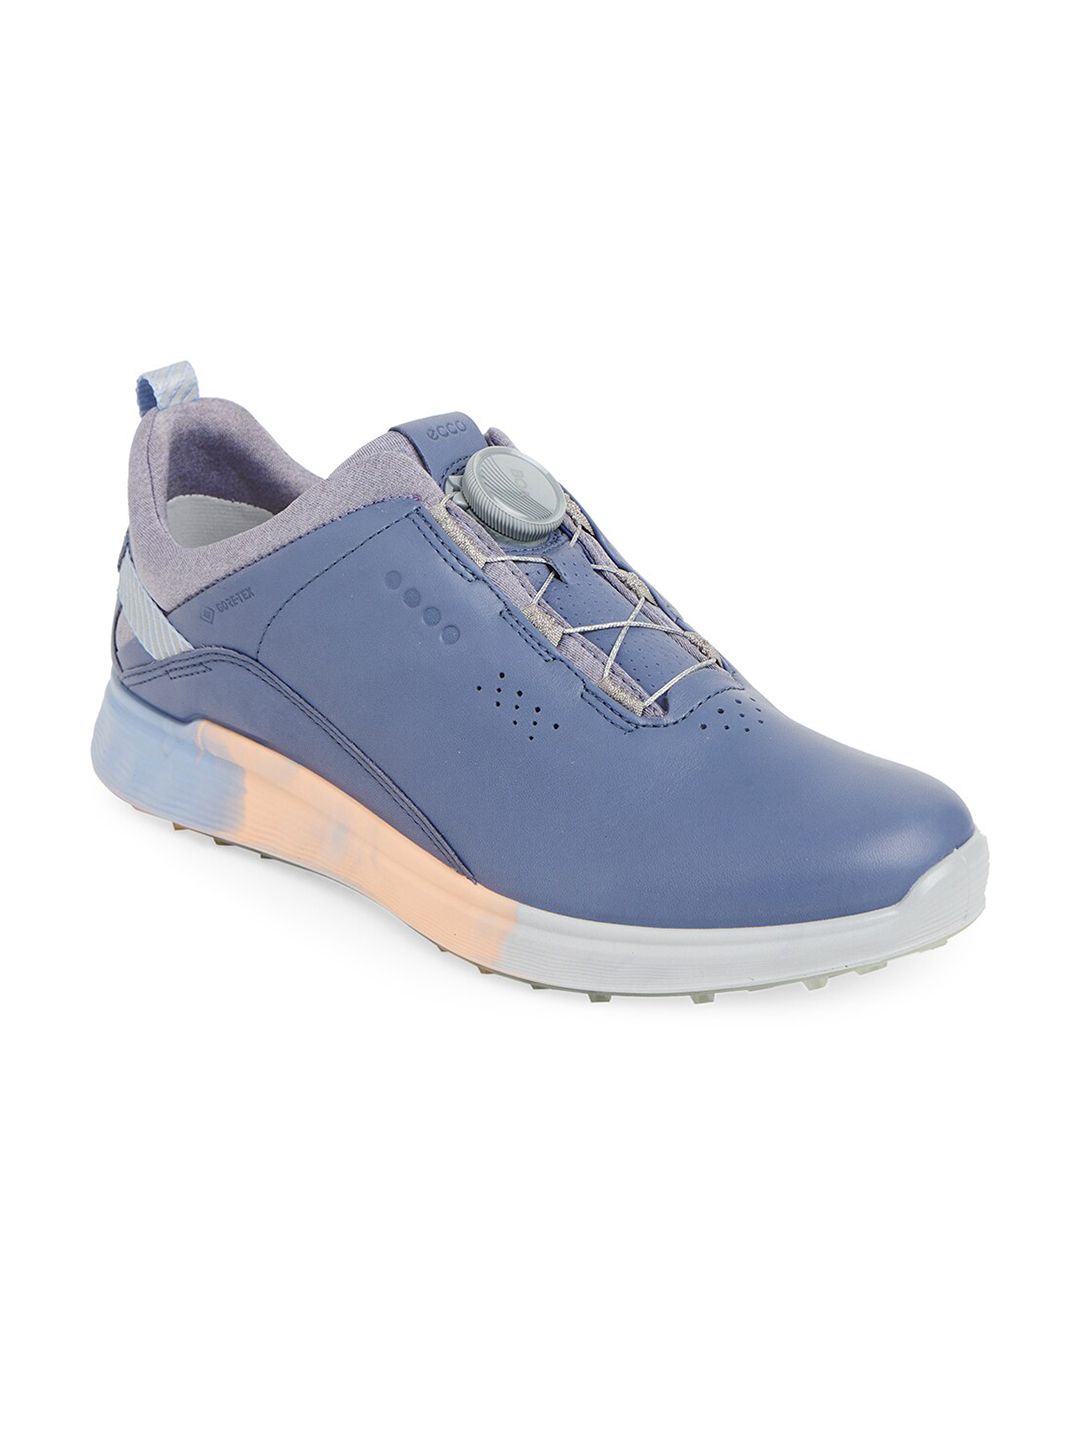 ECCO Women Blue Leather Hybrid Performance Golf Non-Marking Shoes Price in India